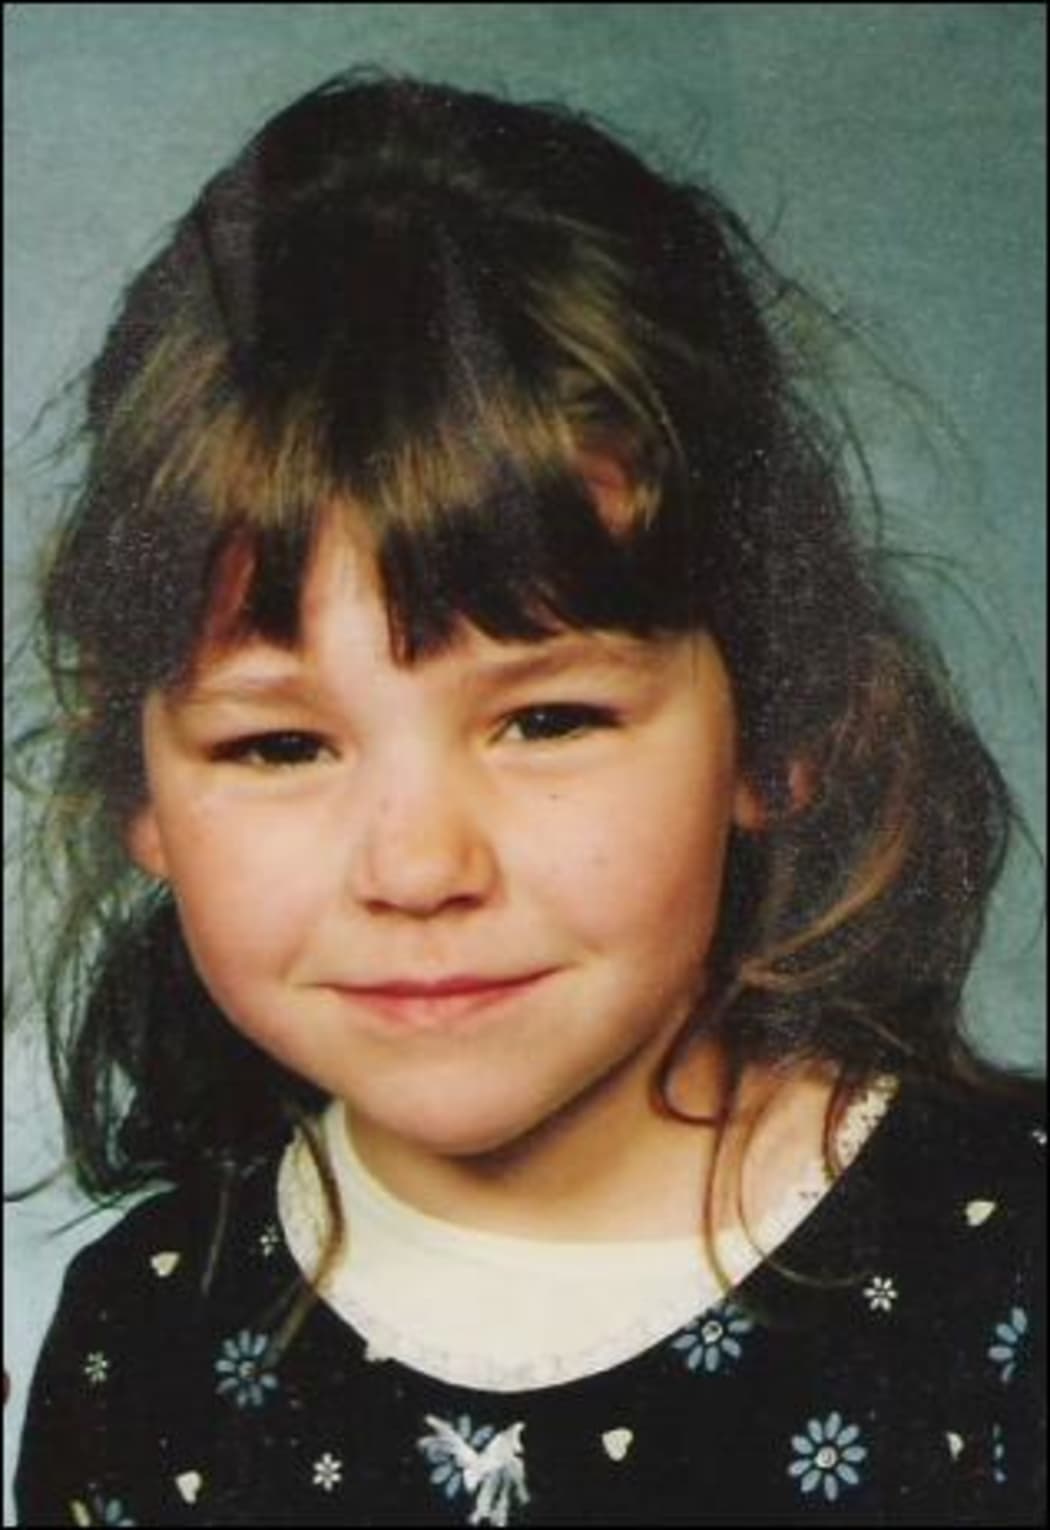 An image shared by Police when Coral Burrows was reported missing